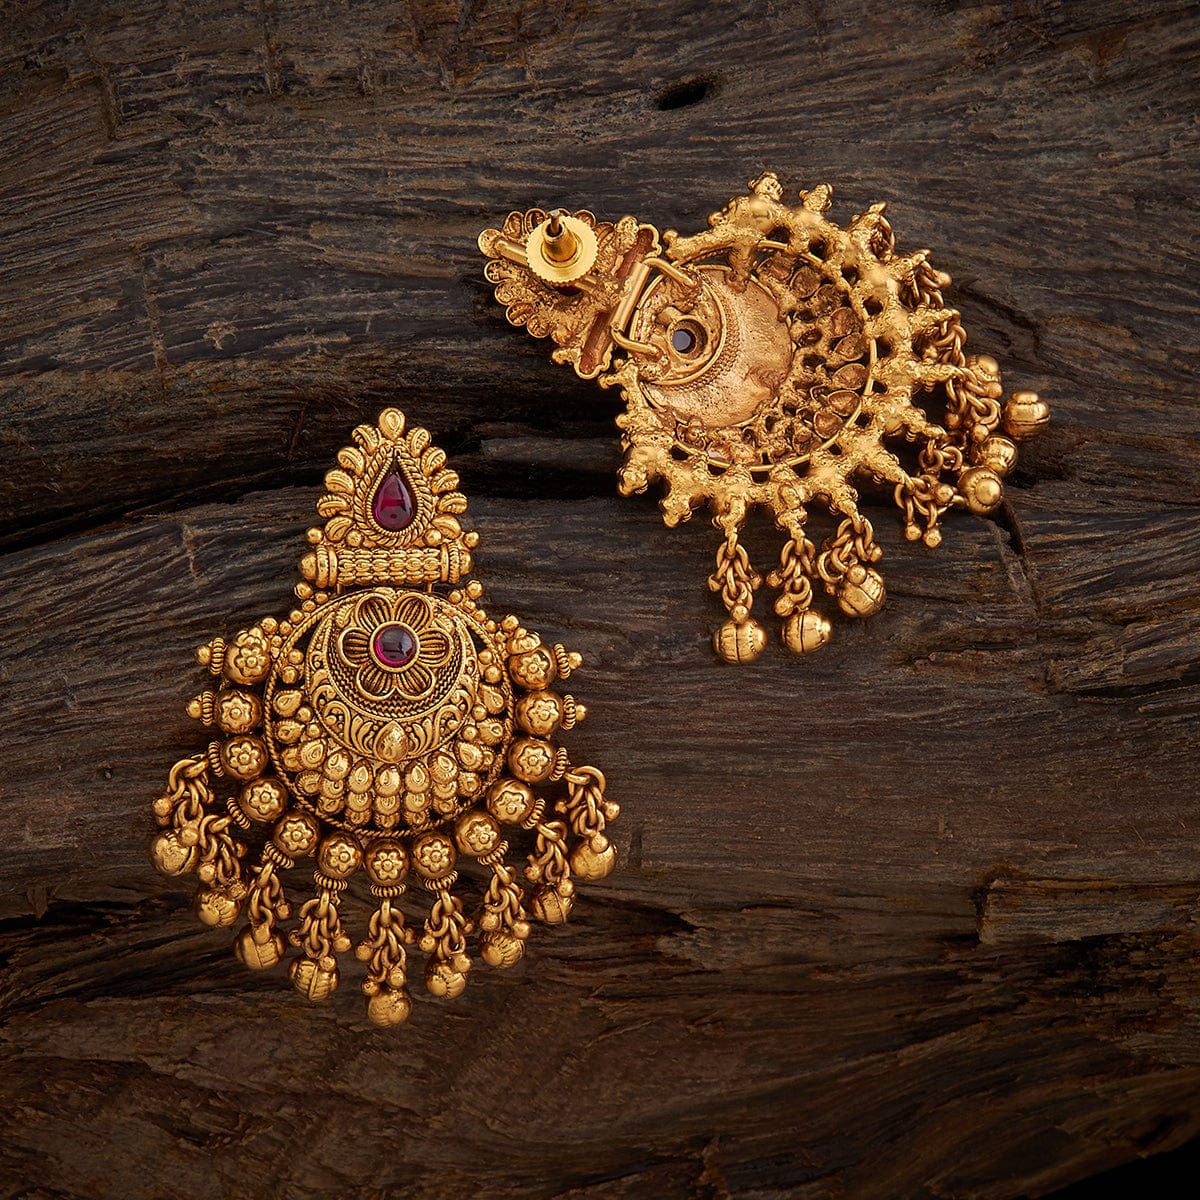 Antique Earrings Collection - 9 Beautiful and Trendy Designs